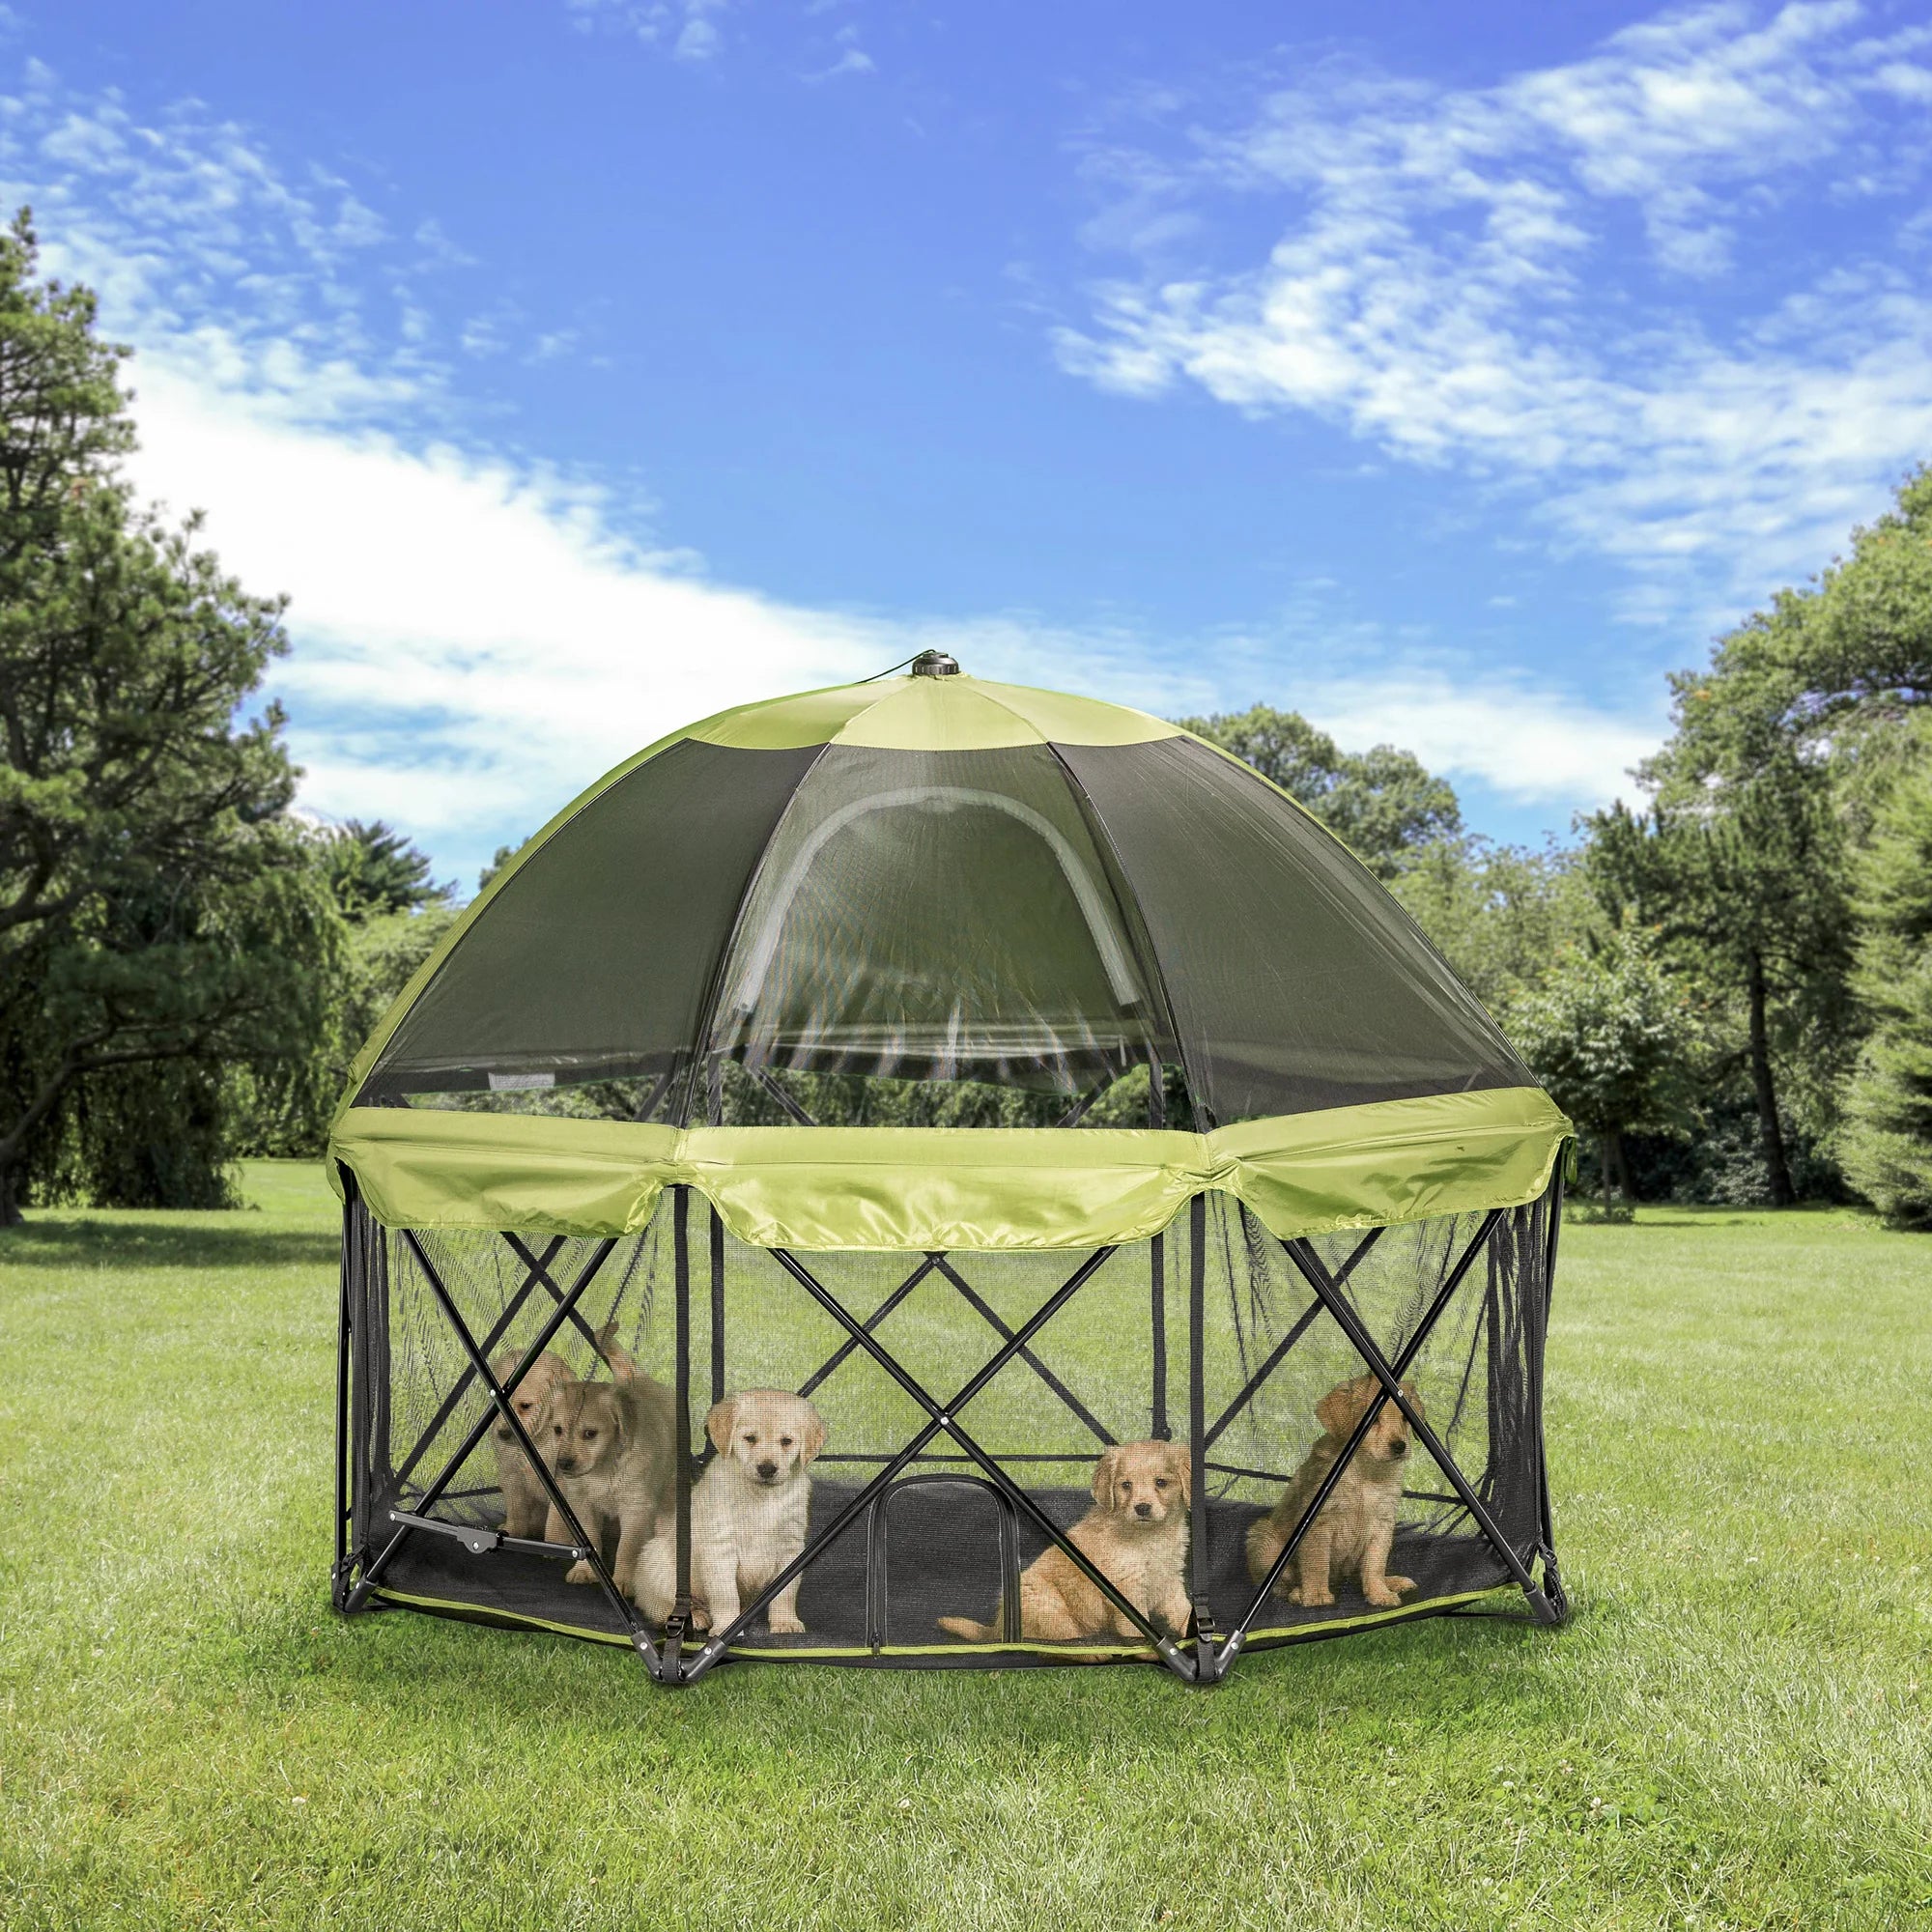 Five puppies resting in the Portable Pet Pen with Canopy while hanging out on a green space at the park.